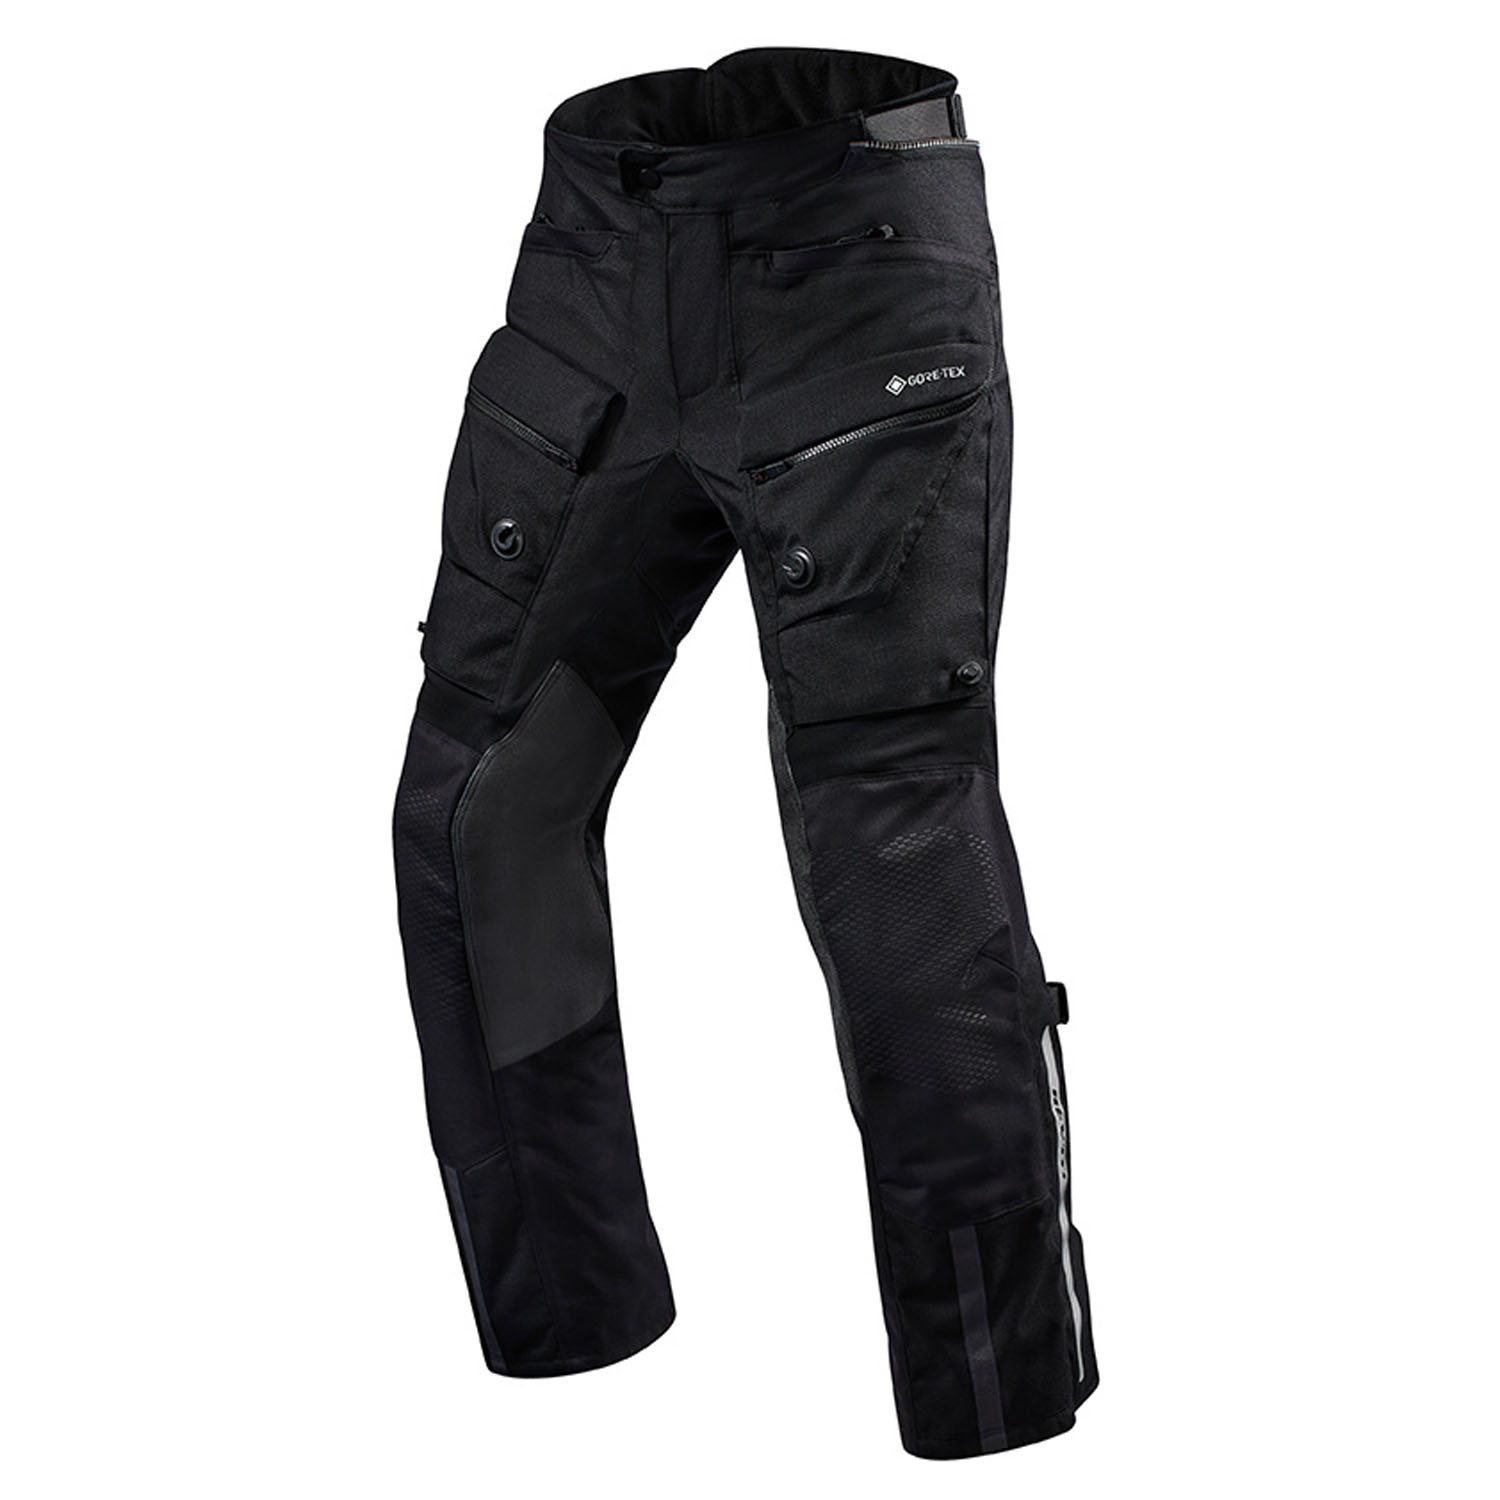 Image of REV'IT! Trousers Defender 3 GTX Black Long Motorcycle Pants Size 2XL ID 8700001319928